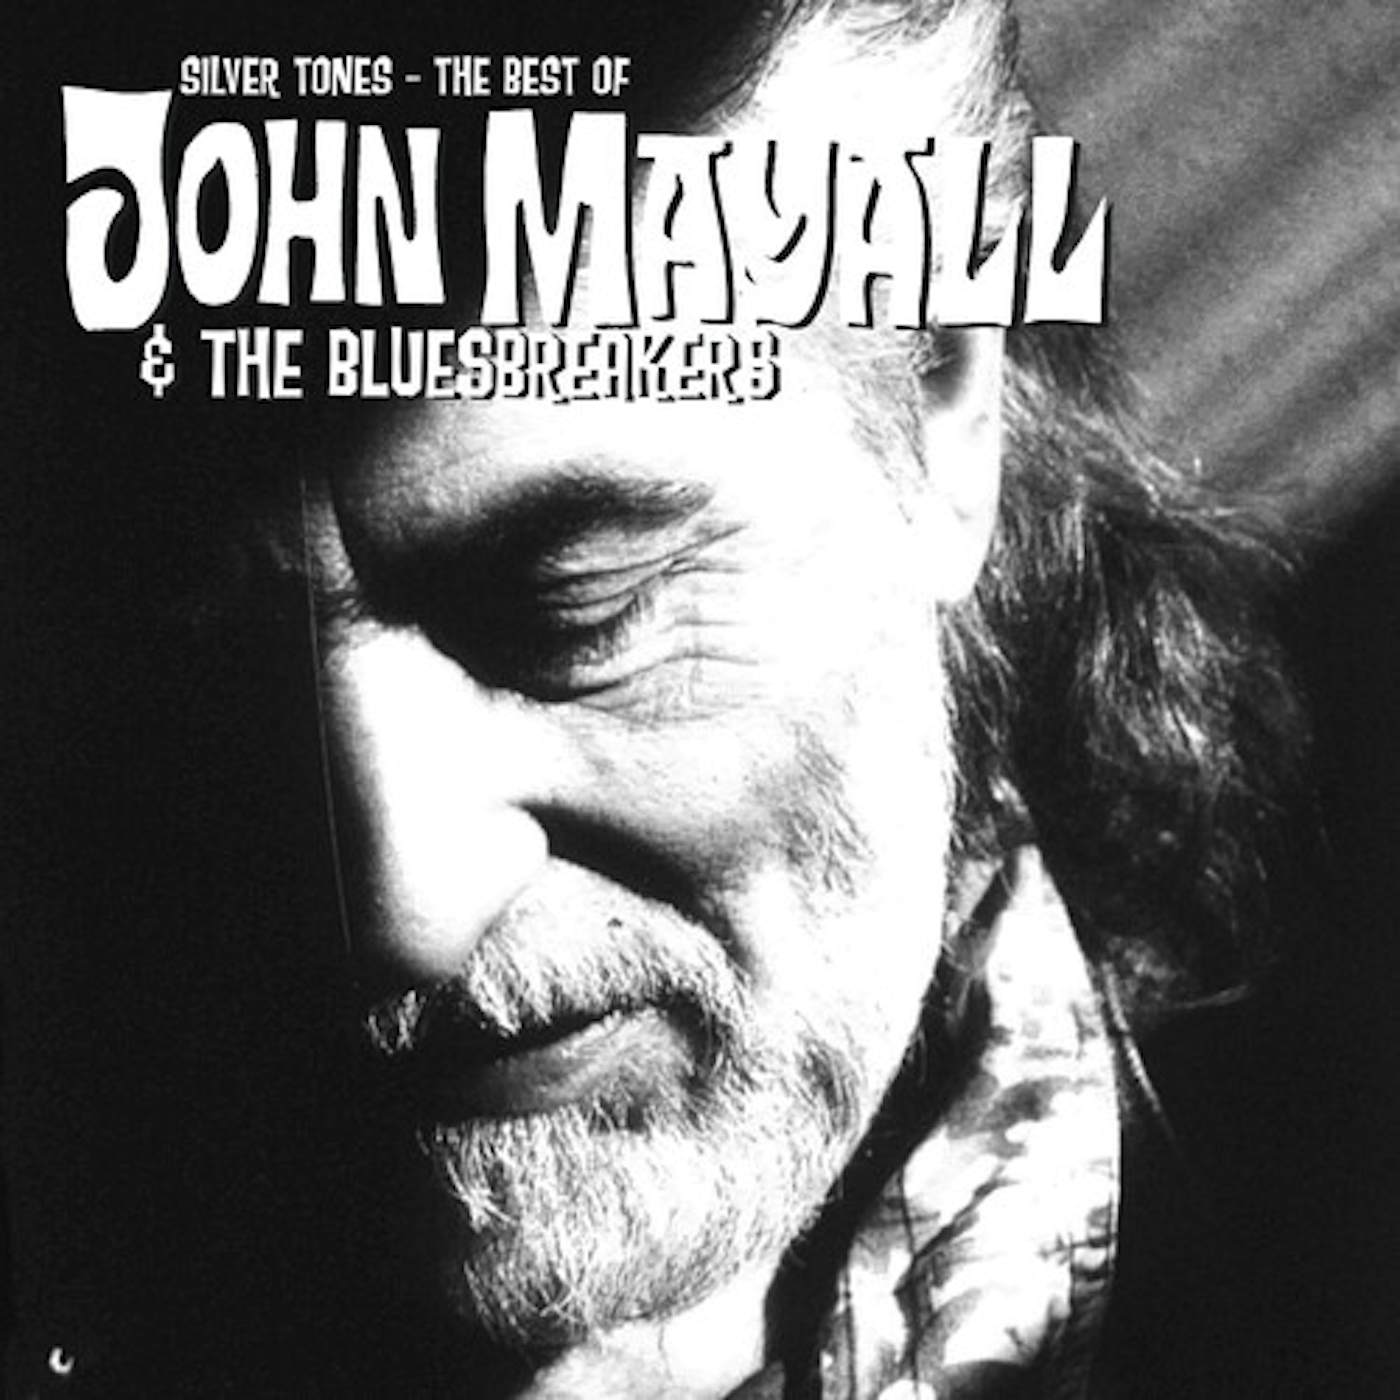 John Mayall & The Bluesbreakers SILVER TONES: THE BEST OF (IMPORT) CD